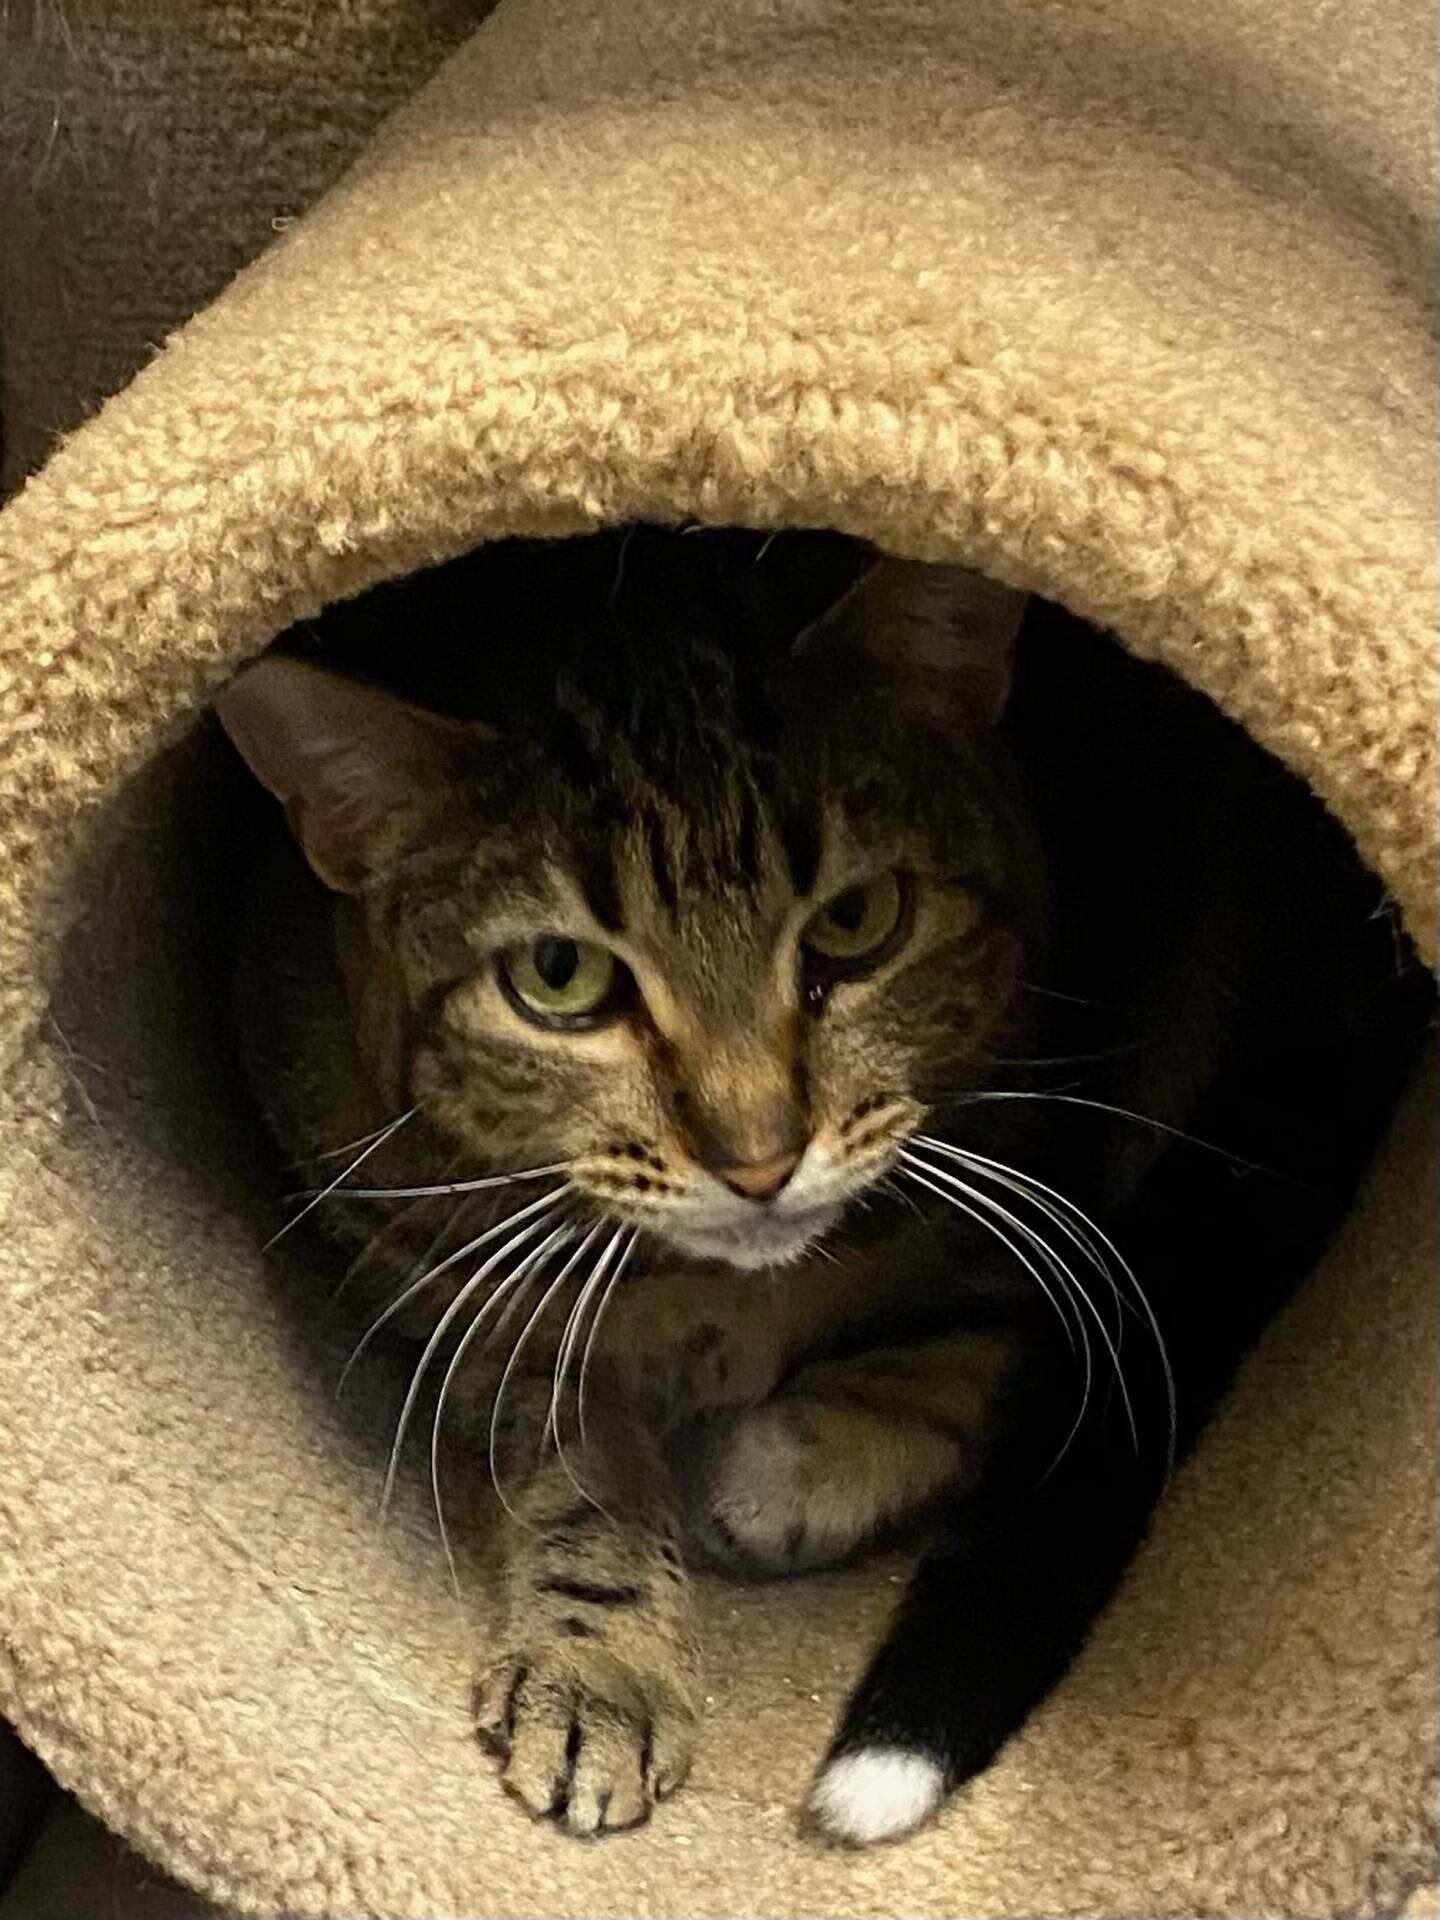 Macy is a 3-year-old gray short-hair tabby who is very laid back. Macy is loves people and attention. She has arthritis, so she is often lounging.  She is very affectionate and gets along well with other cats.